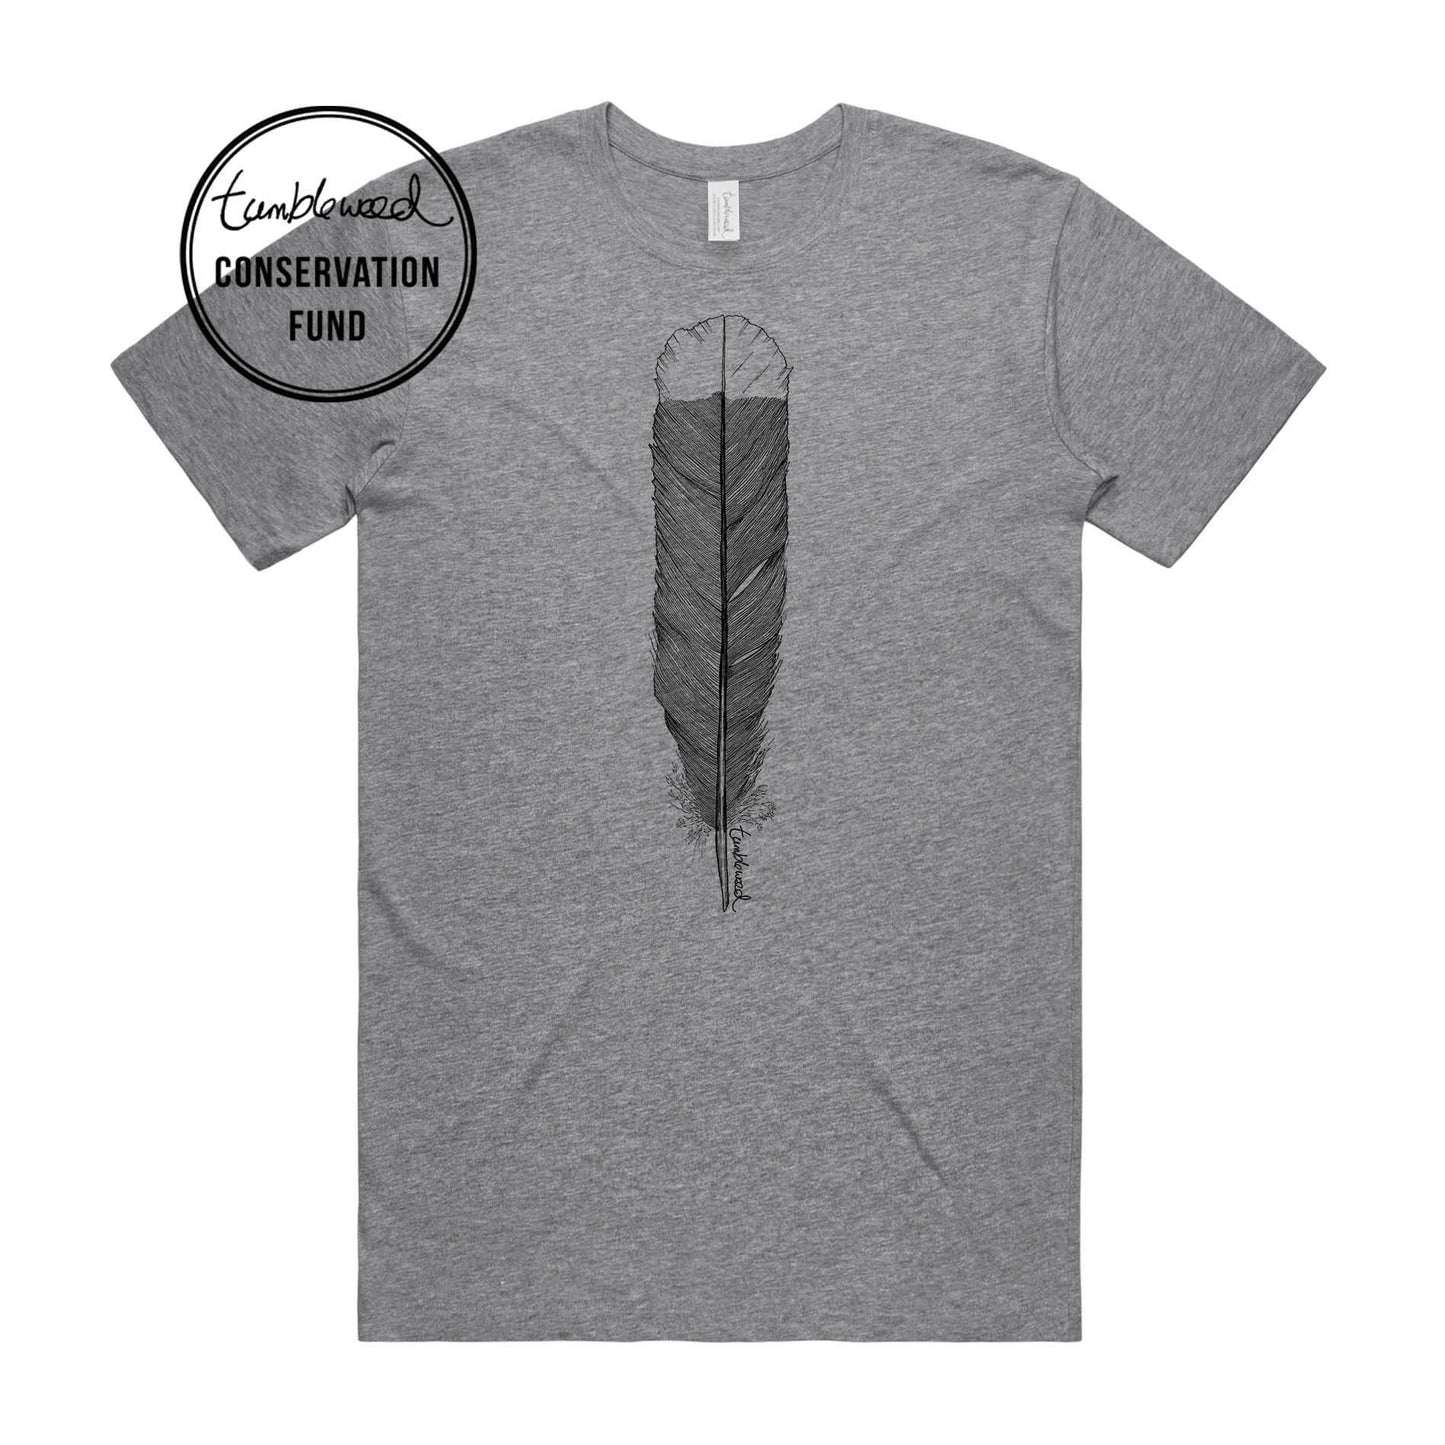 Grey marle, female t-shirt featuring a screen printed huia feather design.